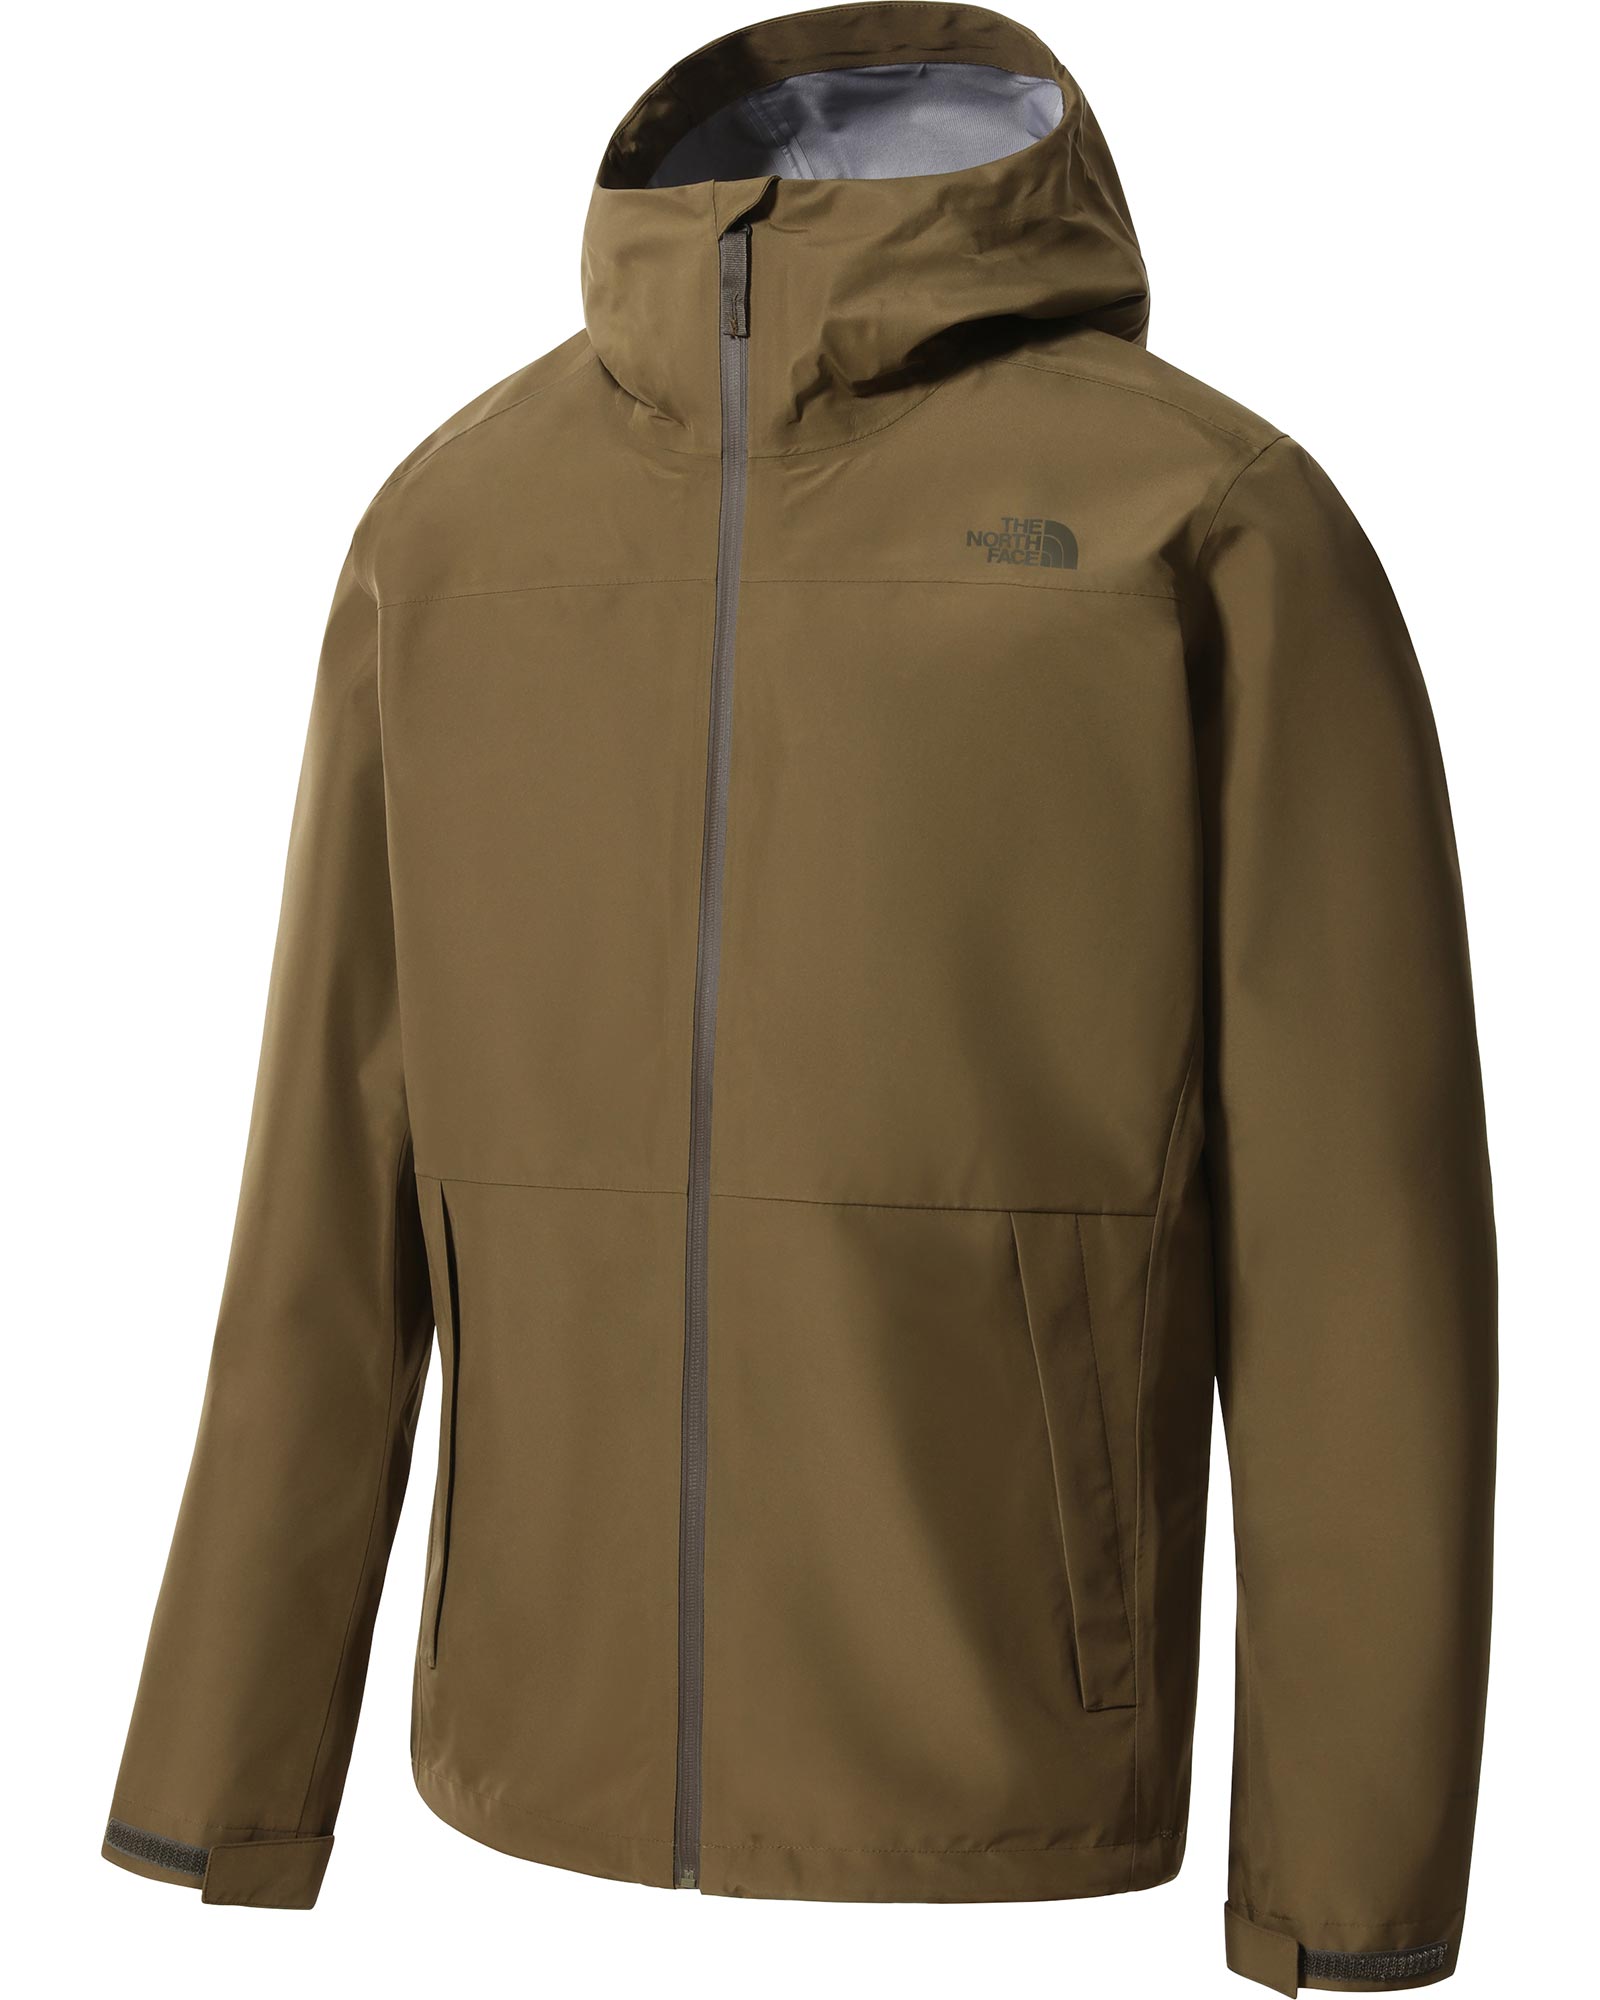 The North Face Dryzzle FUTURELIGHT Men’s Jacket - Military Olive S